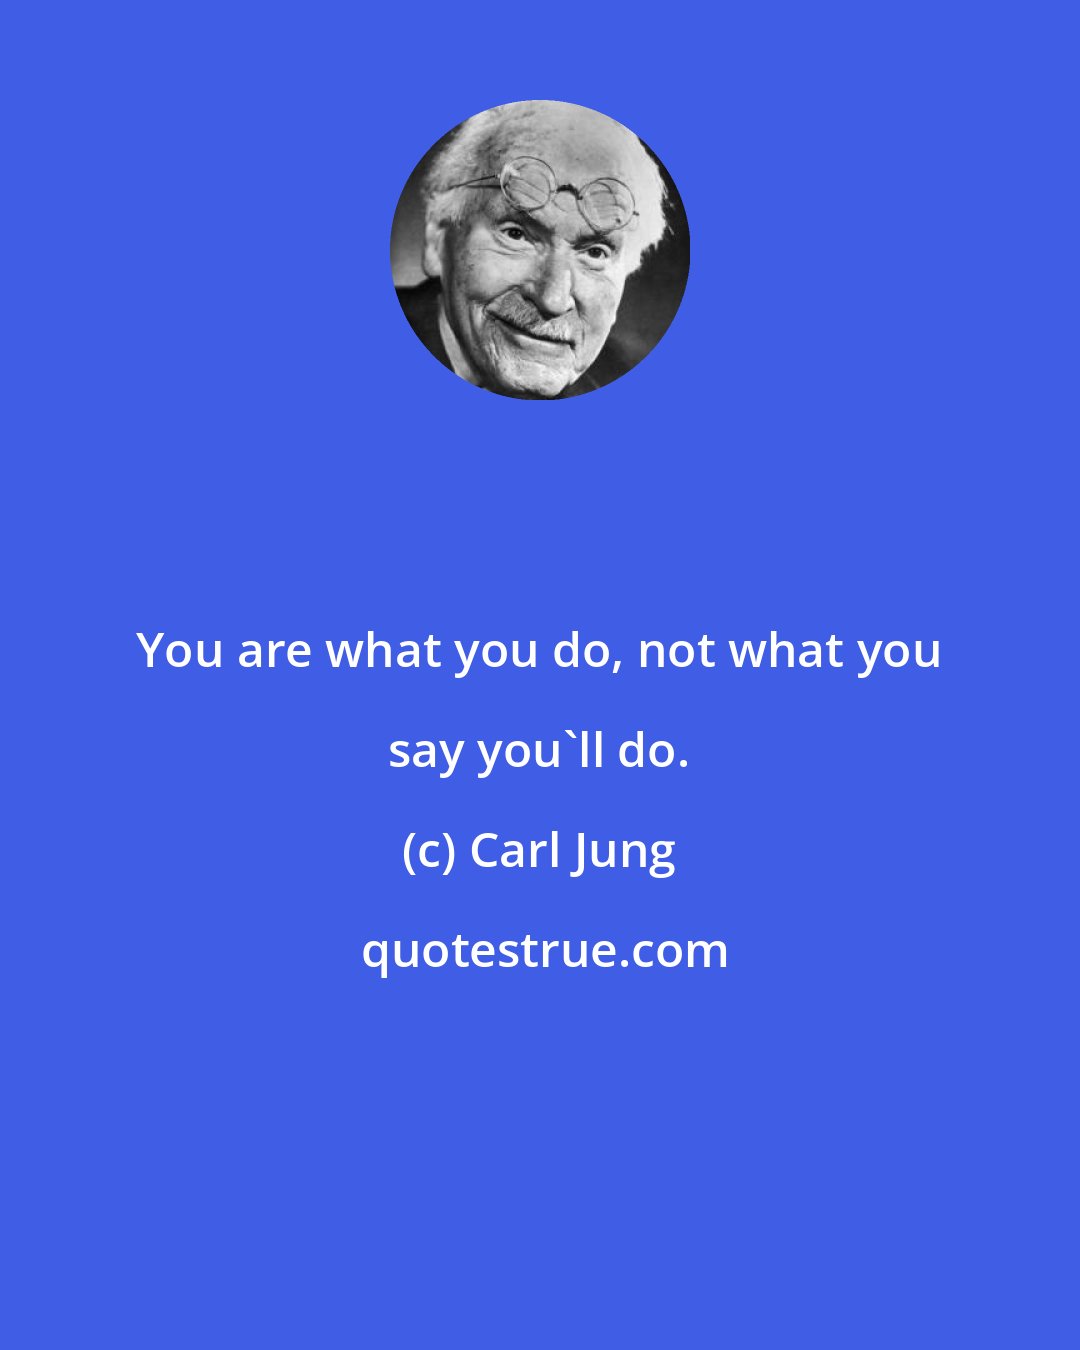 Carl Jung: You are what you do, not what you say you'll do.